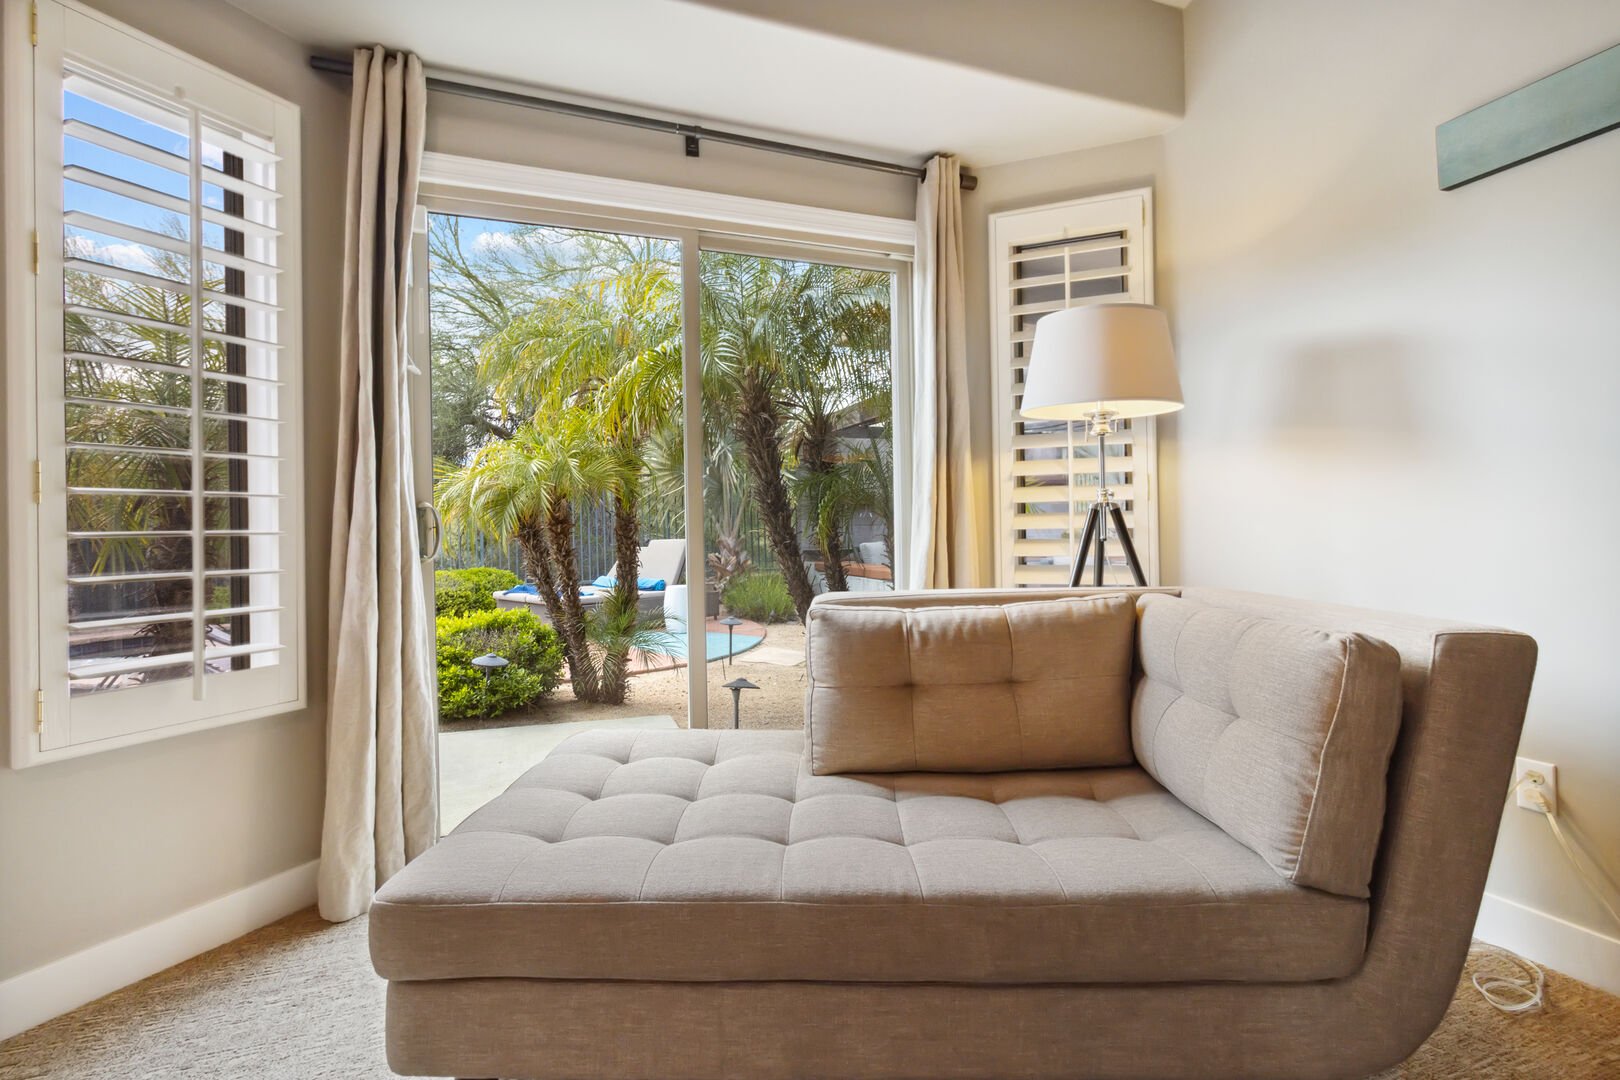 Primary Suite chaise lounge. Perfect pool views